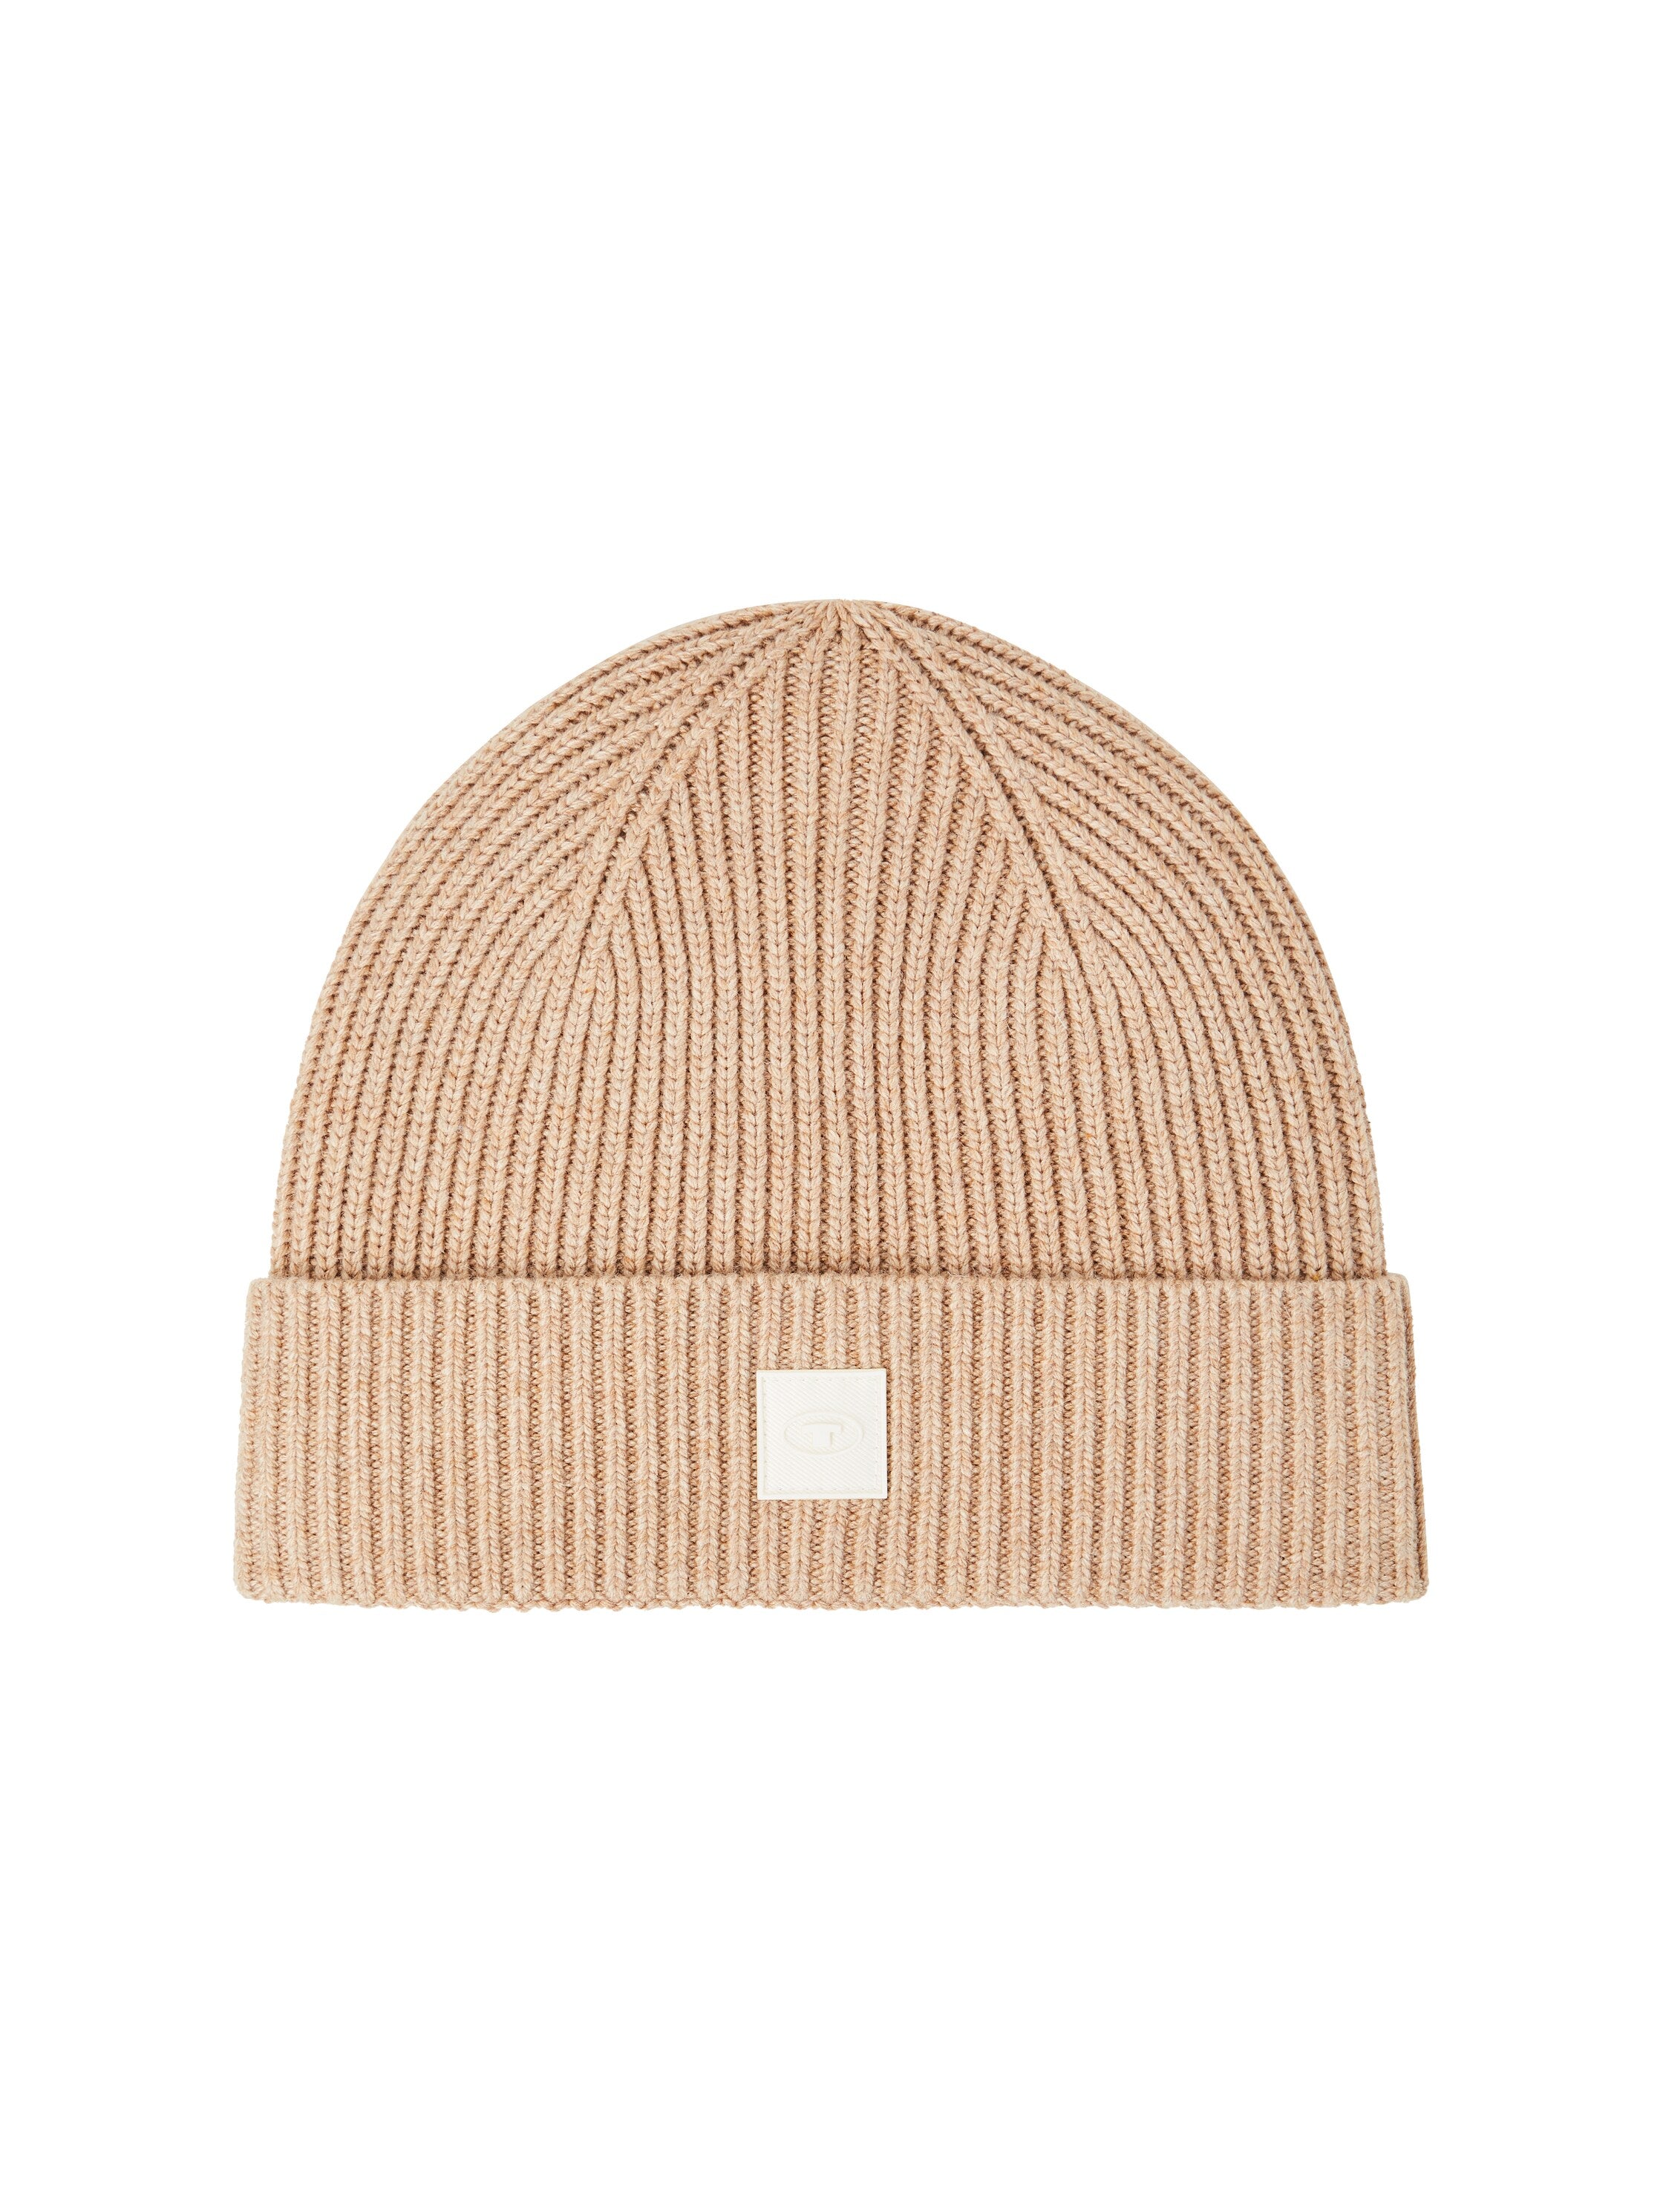 Tom Tailor Ribbed Beige Knitted Beanie